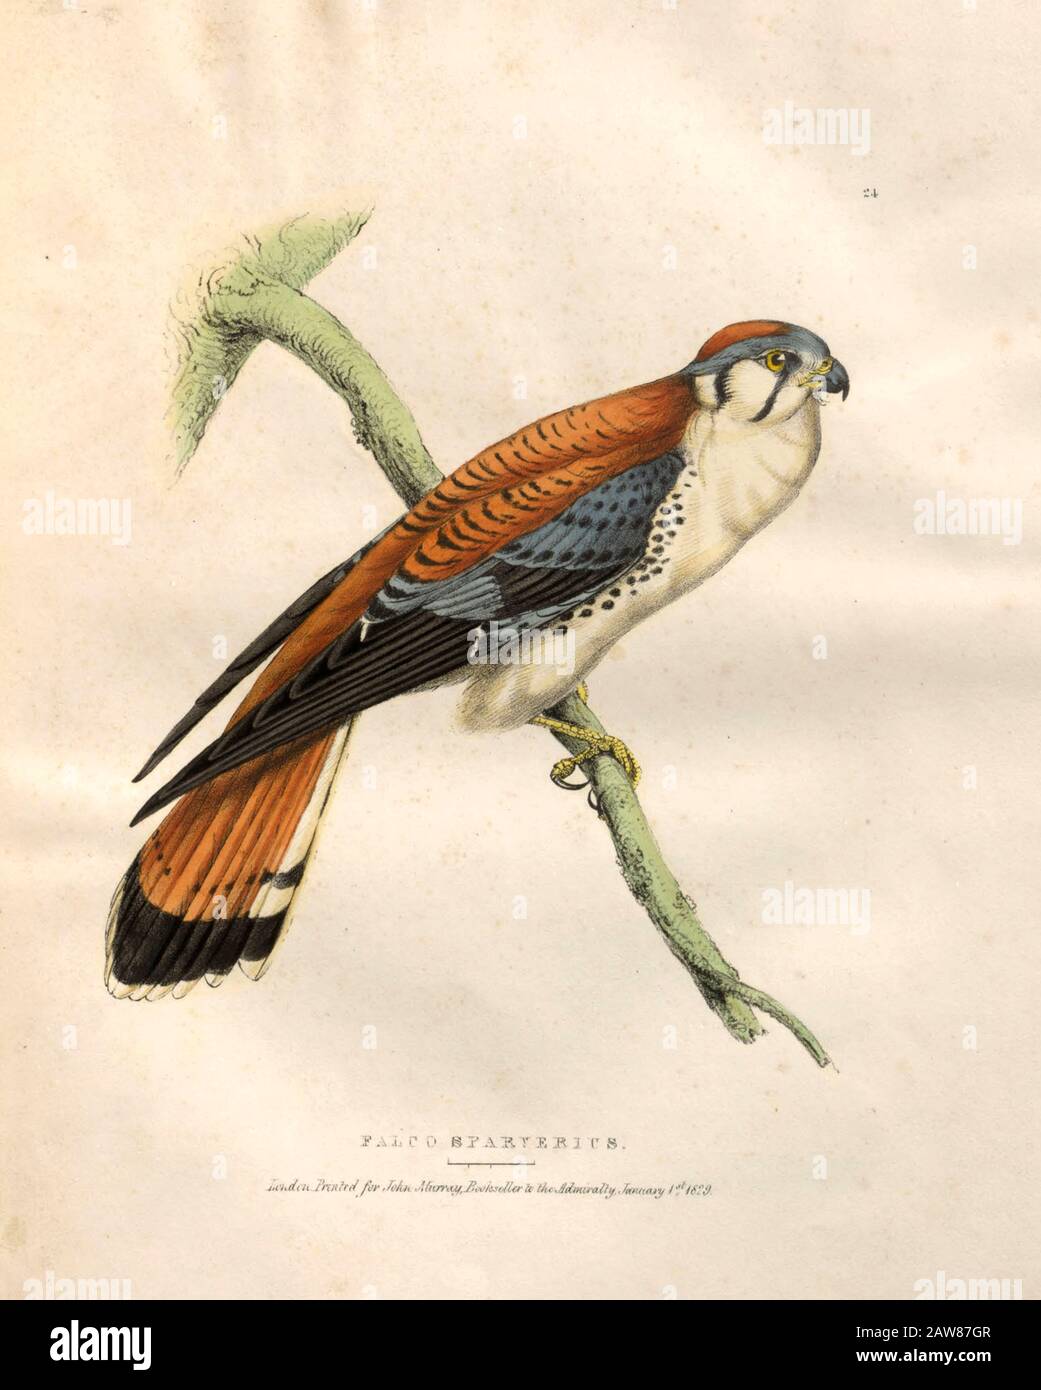 American kestrel color plates of North American birds from Fauna boreali-americana; or, The zoology of the northern parts of British America, containing descriptions of the objects of natural history collected on the late northern land expeditions under command of Capt. Sir John Franklin by Richardson, John, Sir, 1787-1865 Published 1829 Stock Photo